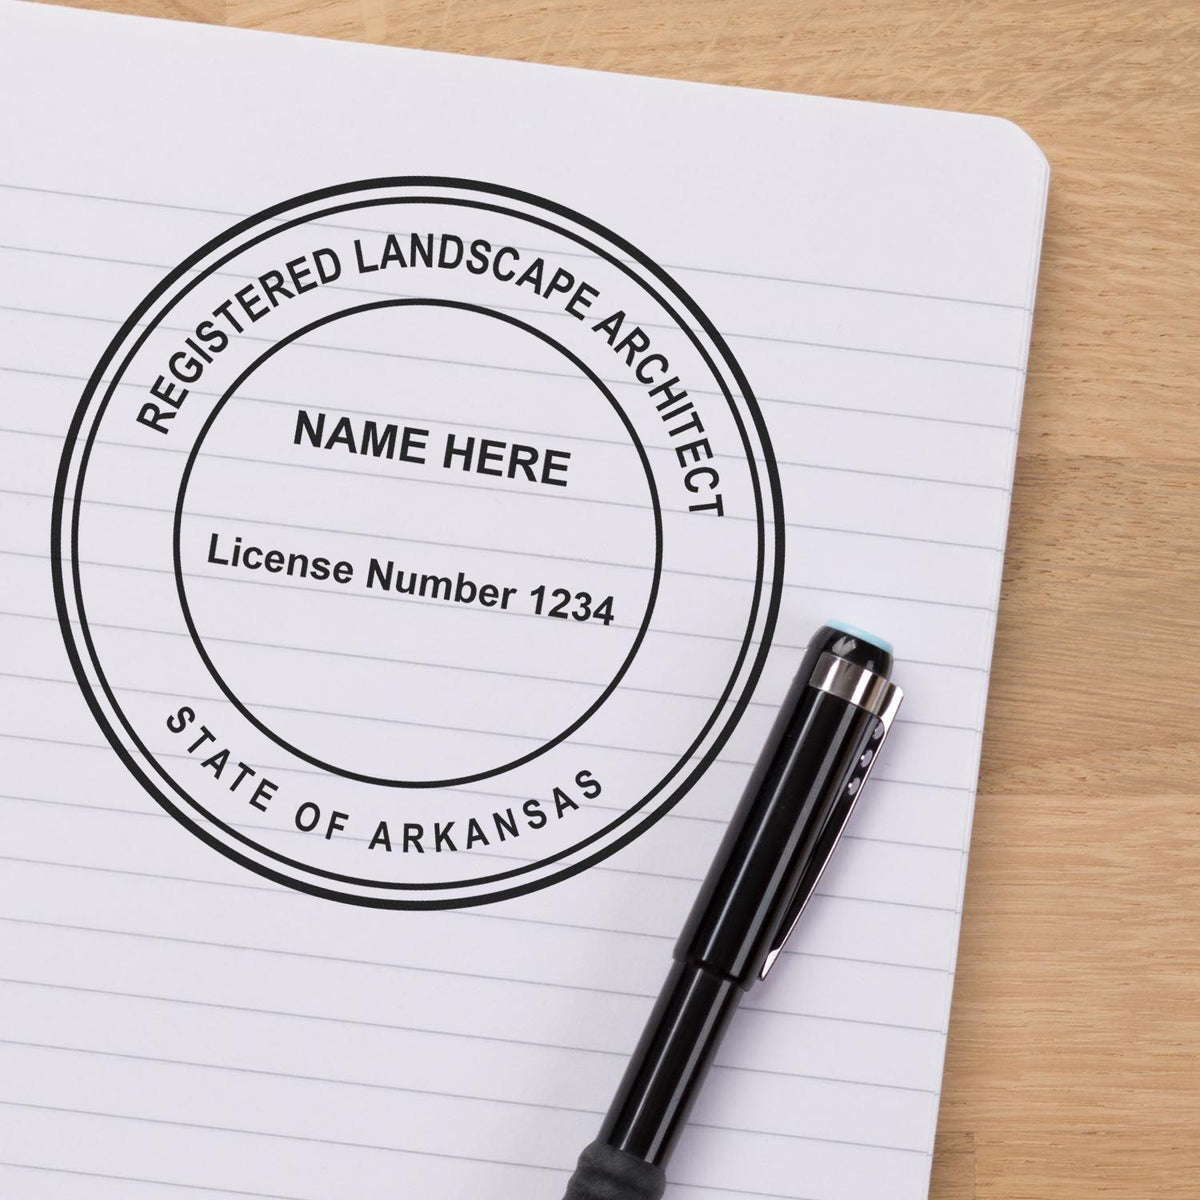 Slim Pre-Inked Arkansas Landscape Architect Seal Stamp in use photo showing a stamped imprint of the Slim Pre-Inked Arkansas Landscape Architect Seal Stamp